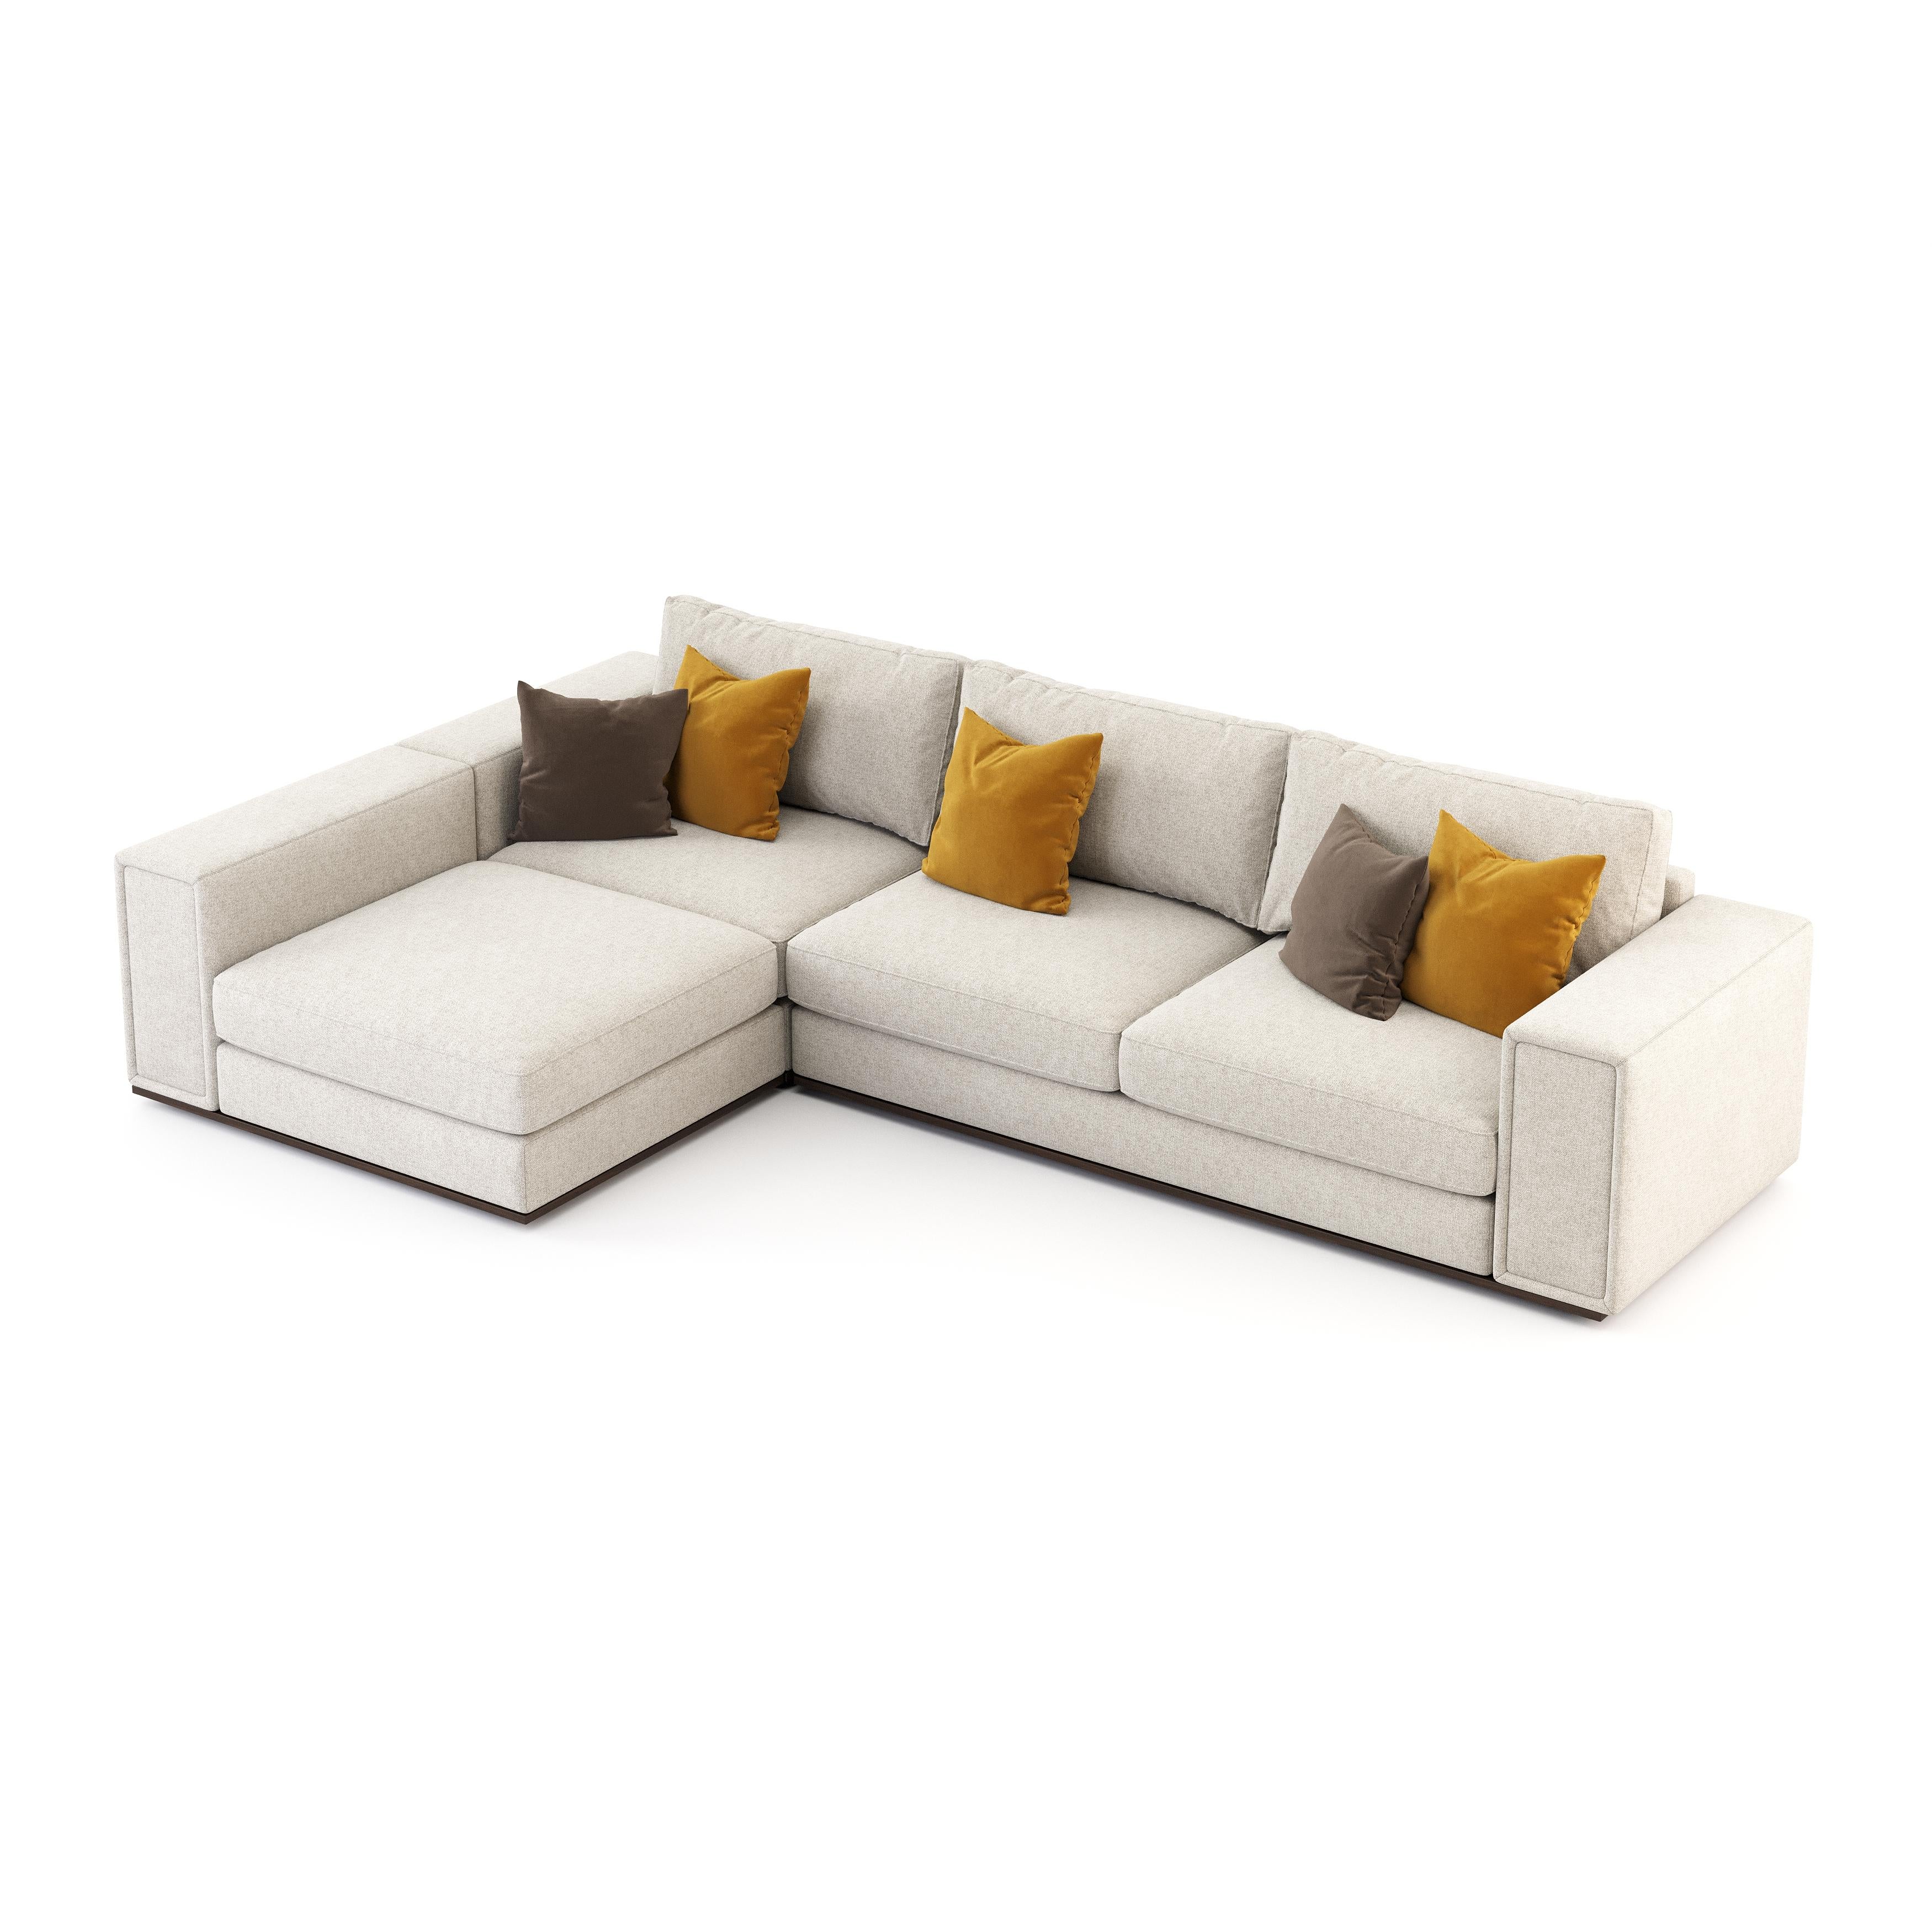 3 seater chaise lounge